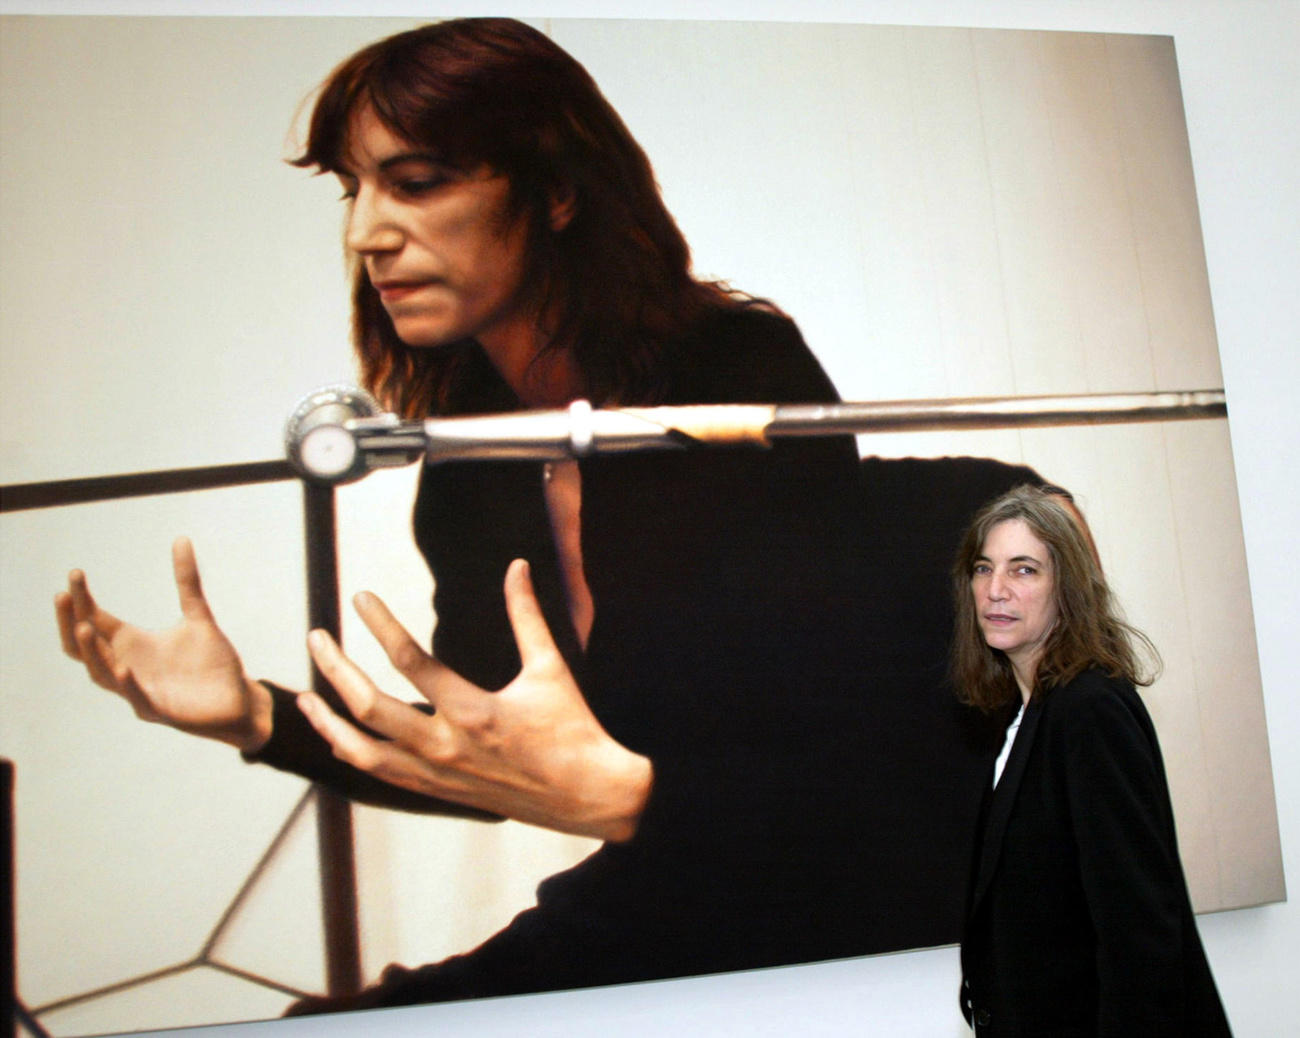 Patti smith in front of painting of Patti Smith